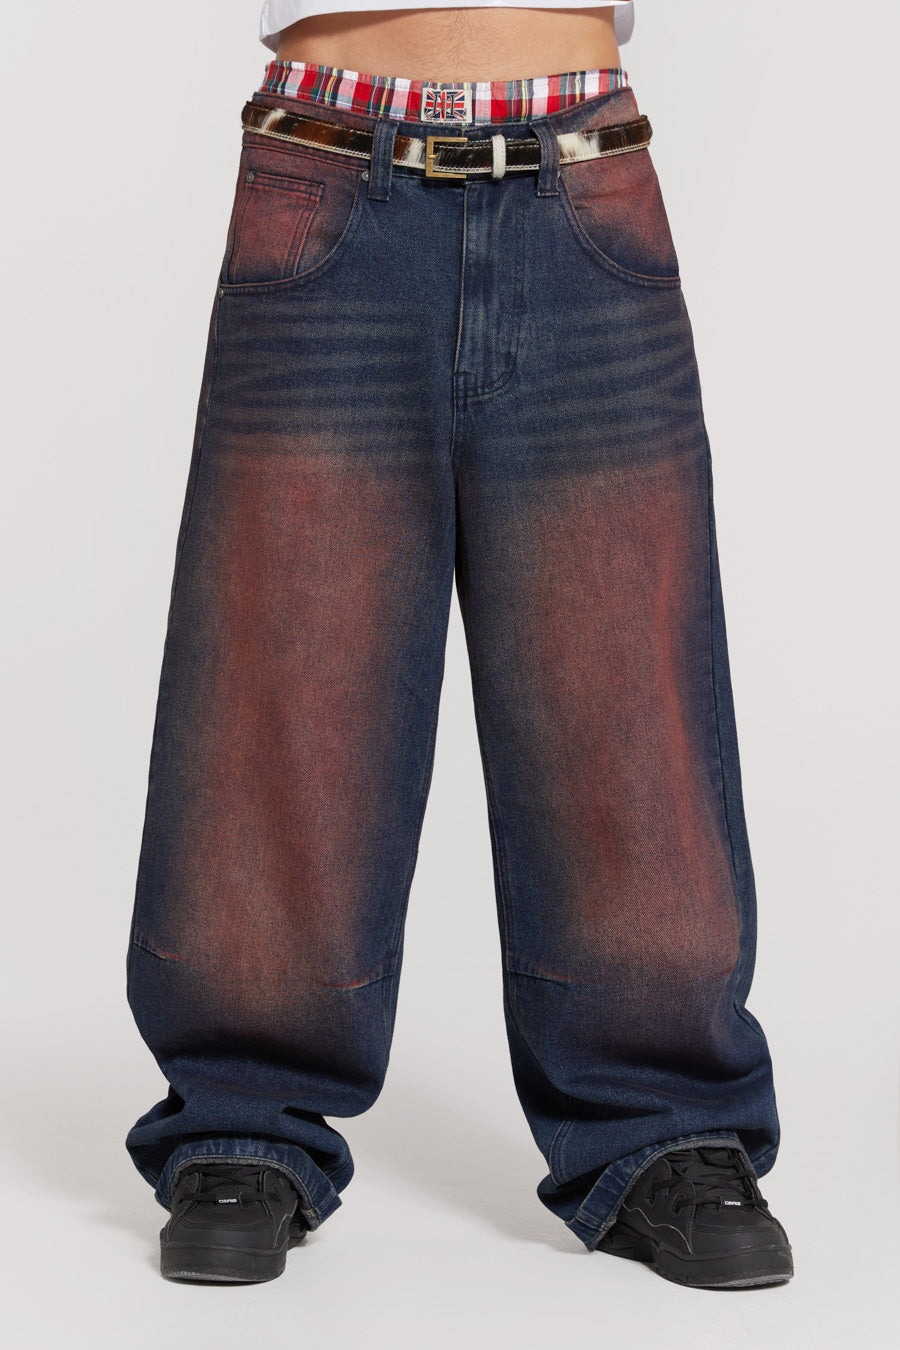 Jaded London Deep Red Colossus Jeans